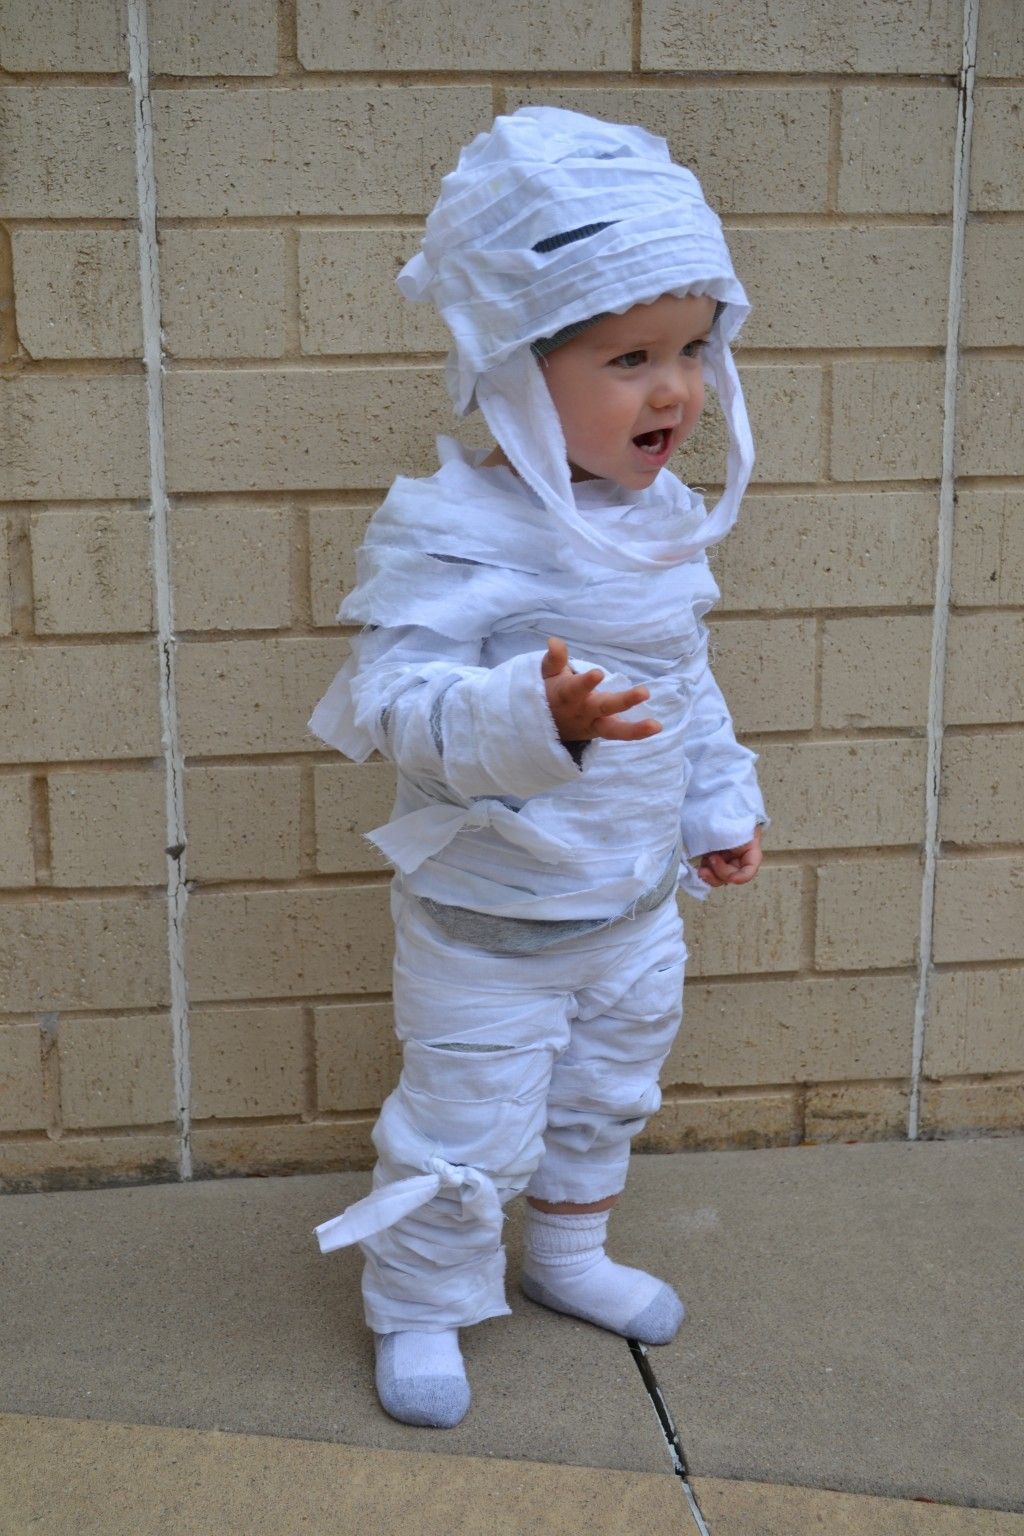 Easy DIY Kids Costumes
 How To Make An Easy No Sew Child s Mummy Costume